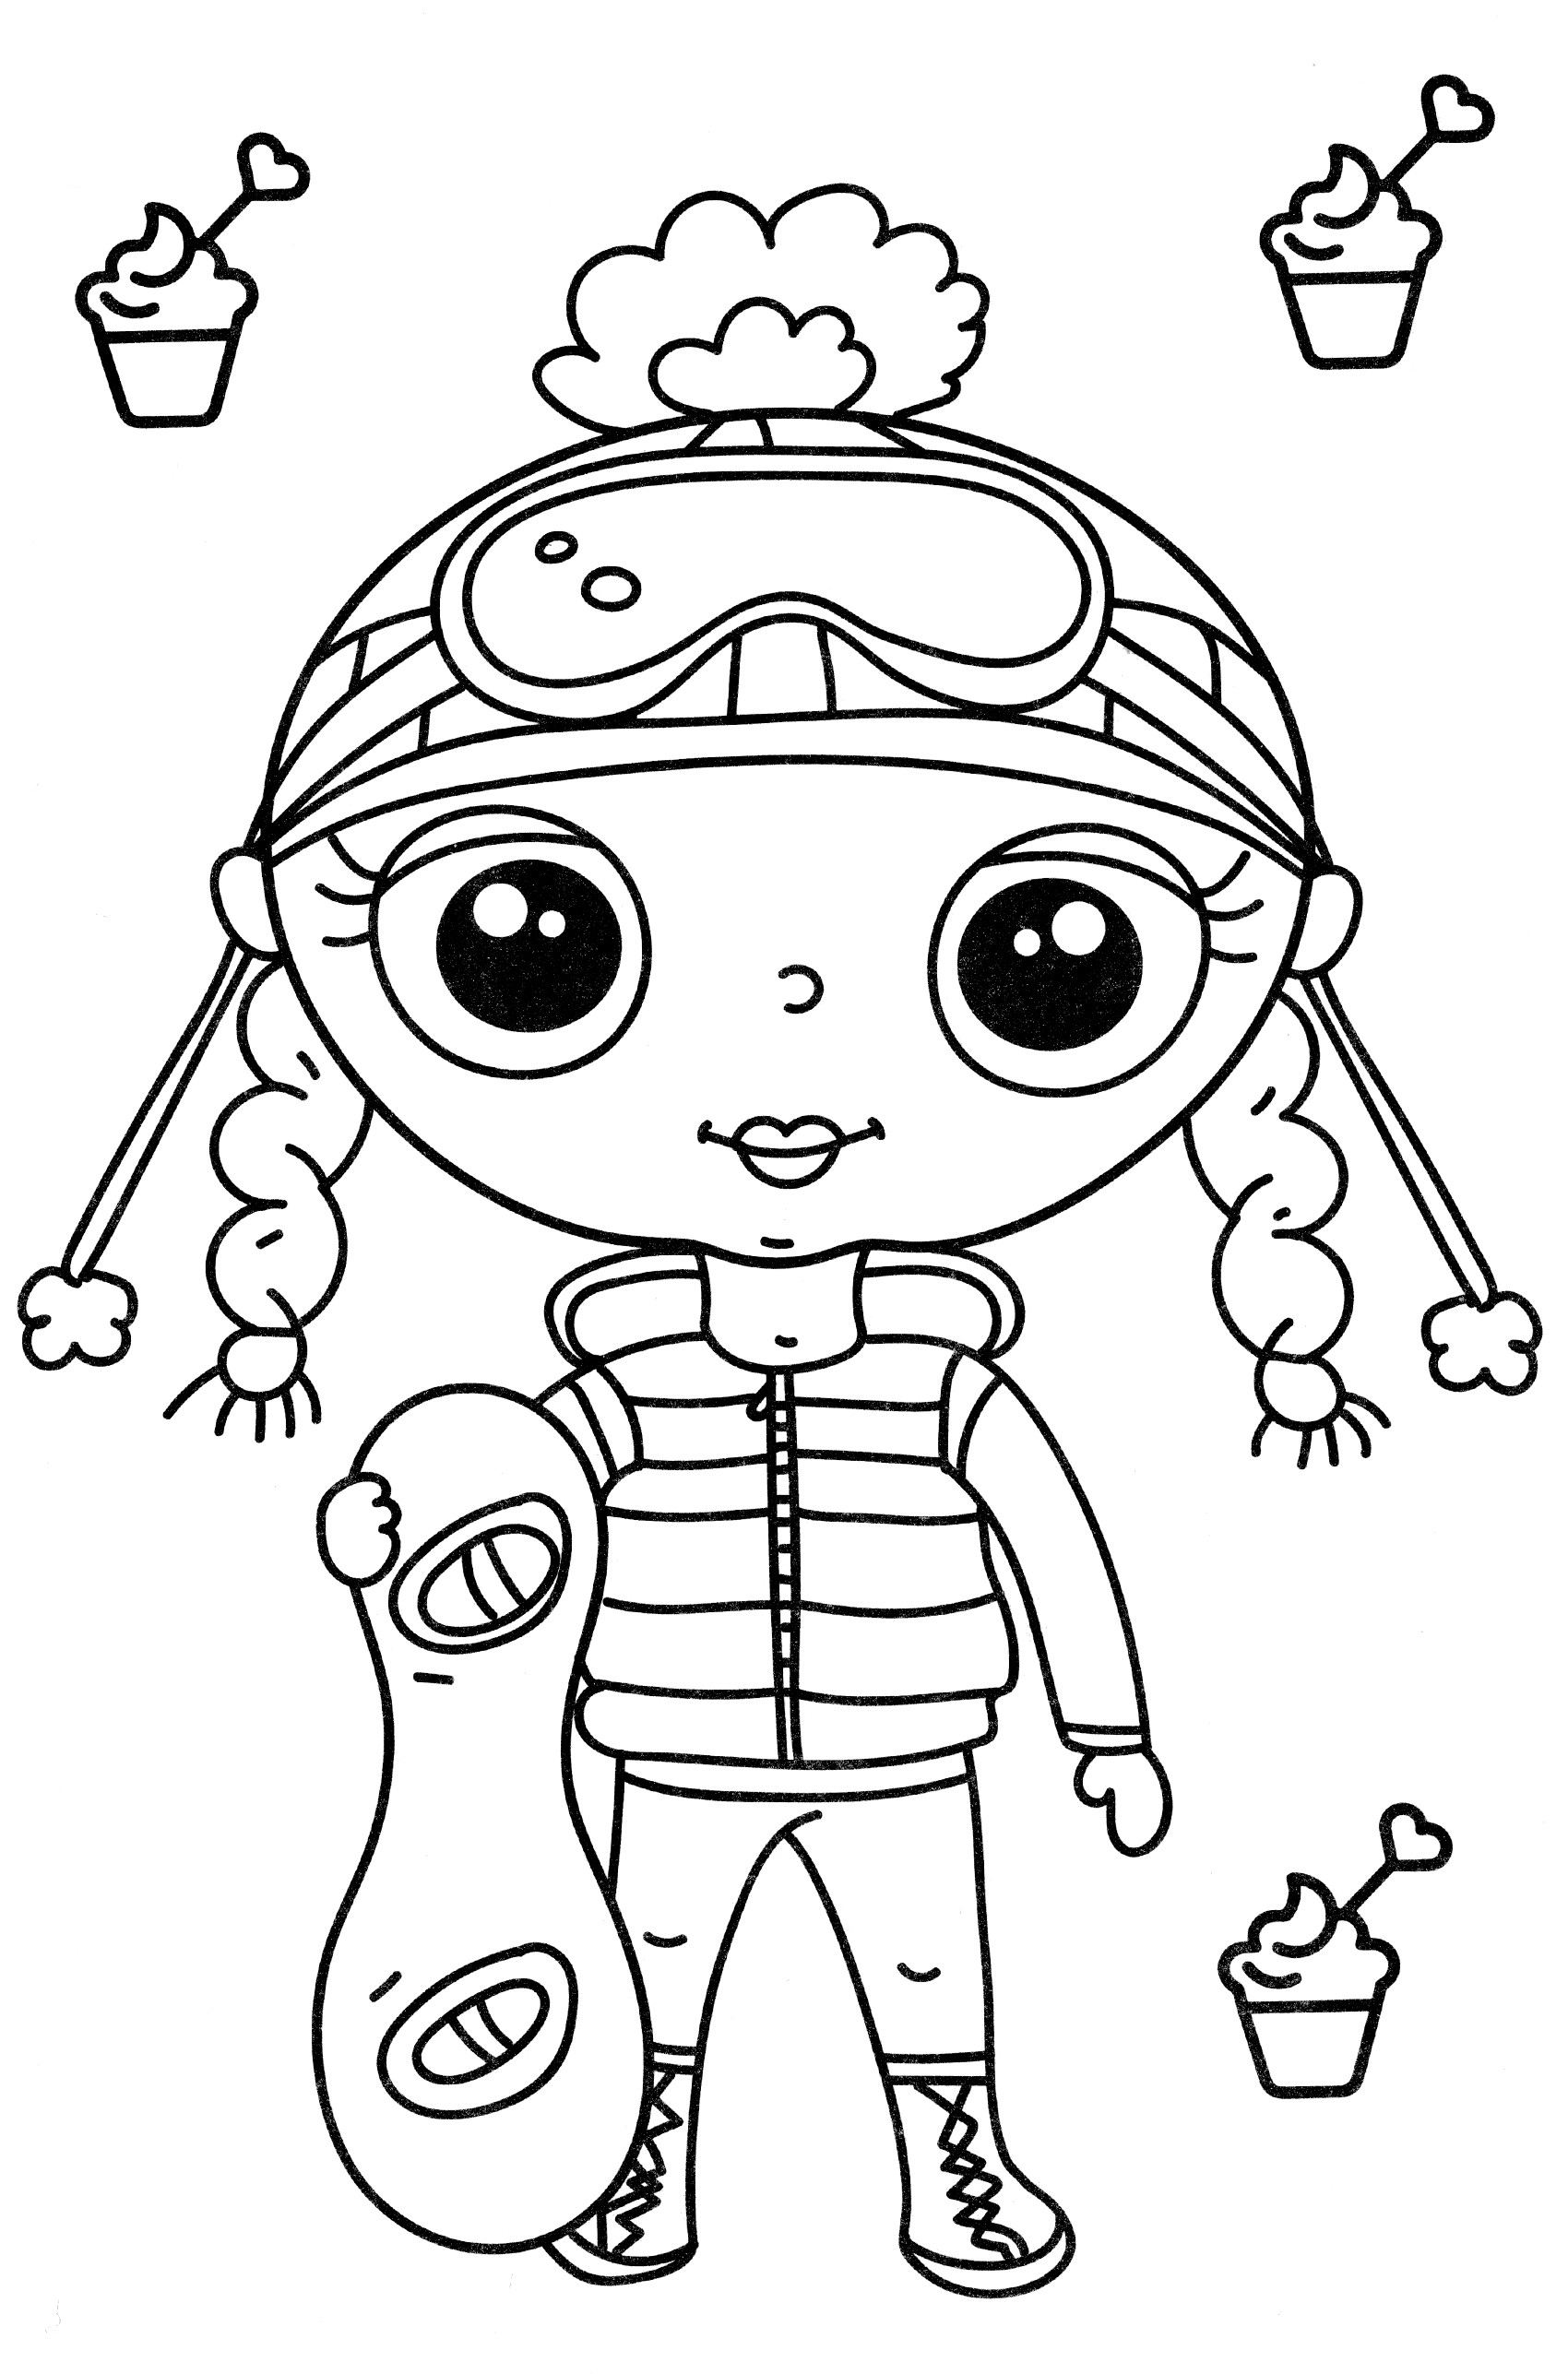 170+ Octonauts Coloring Pages 23